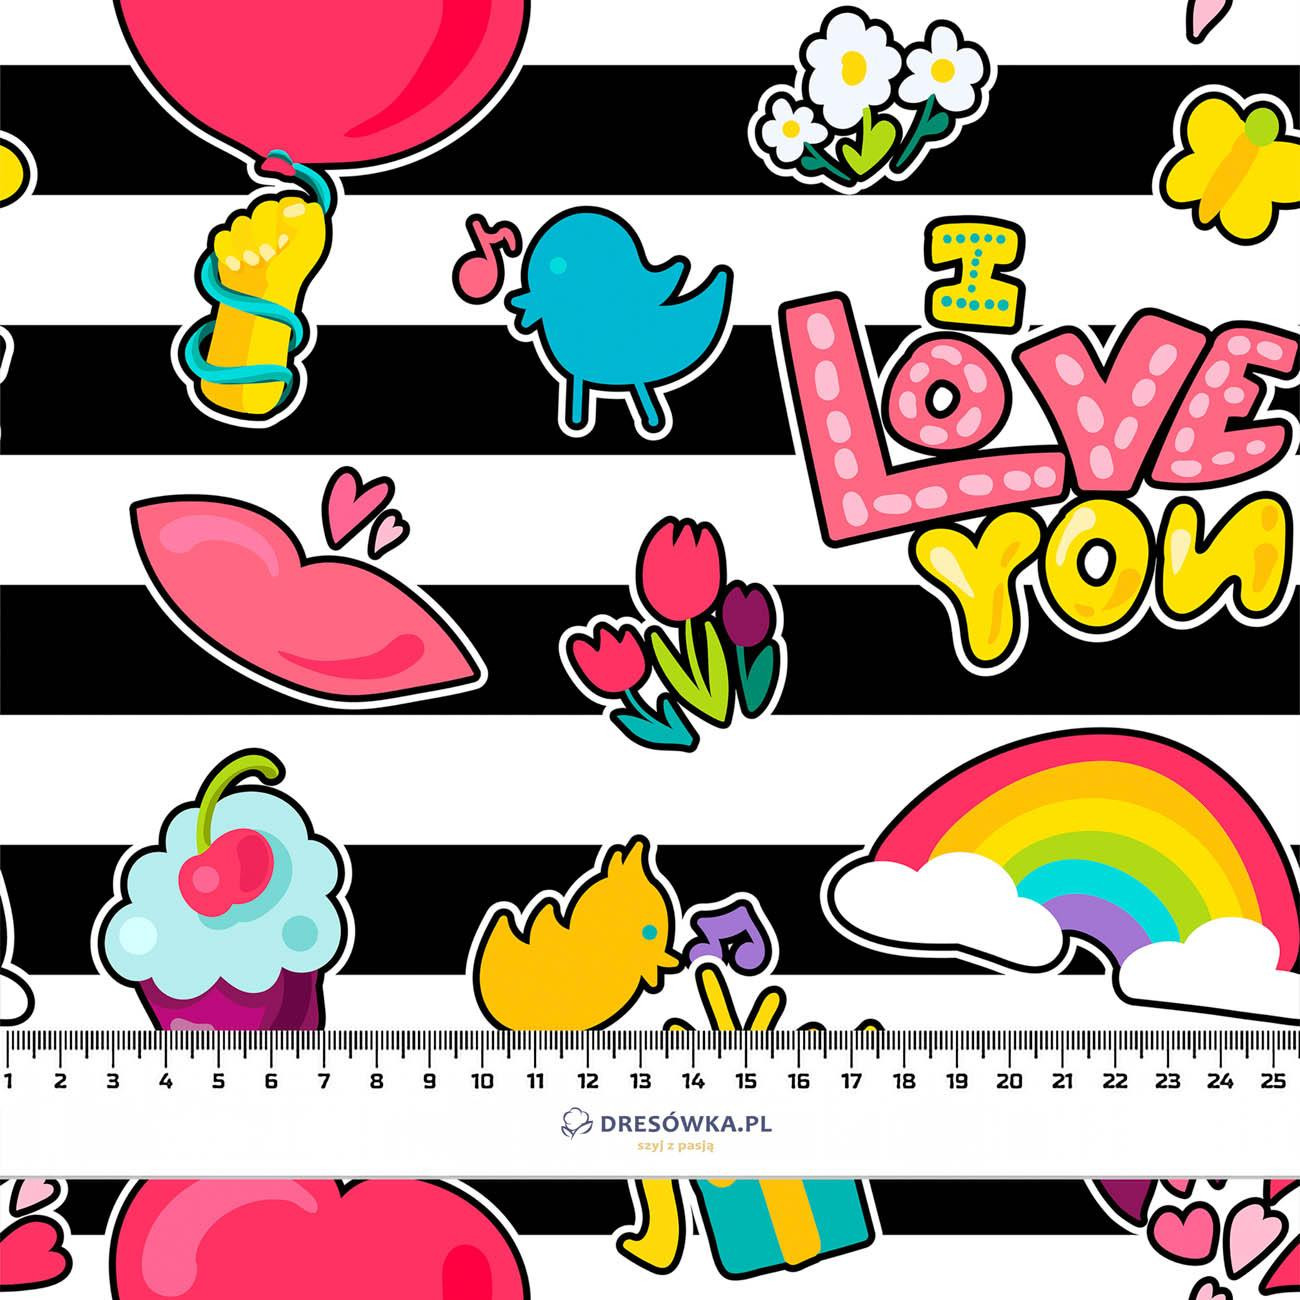 COLORFUL STICKERS PAT. 4 - Cotton woven fabric